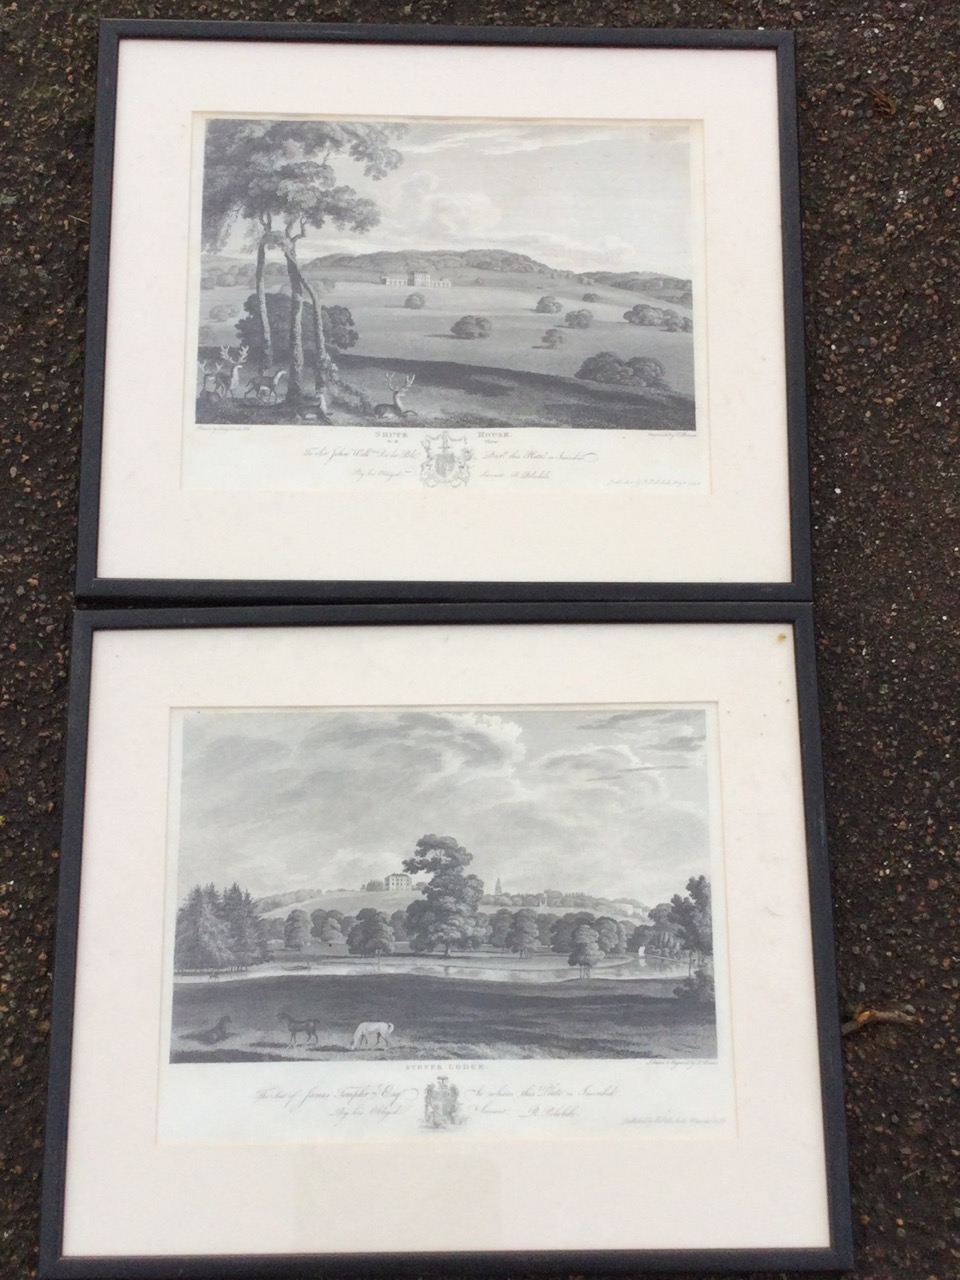 A pair of oak framed rural prints published by Lipschitz titled A Kentish Farmyard & A Glimpse of an - Image 3 of 3